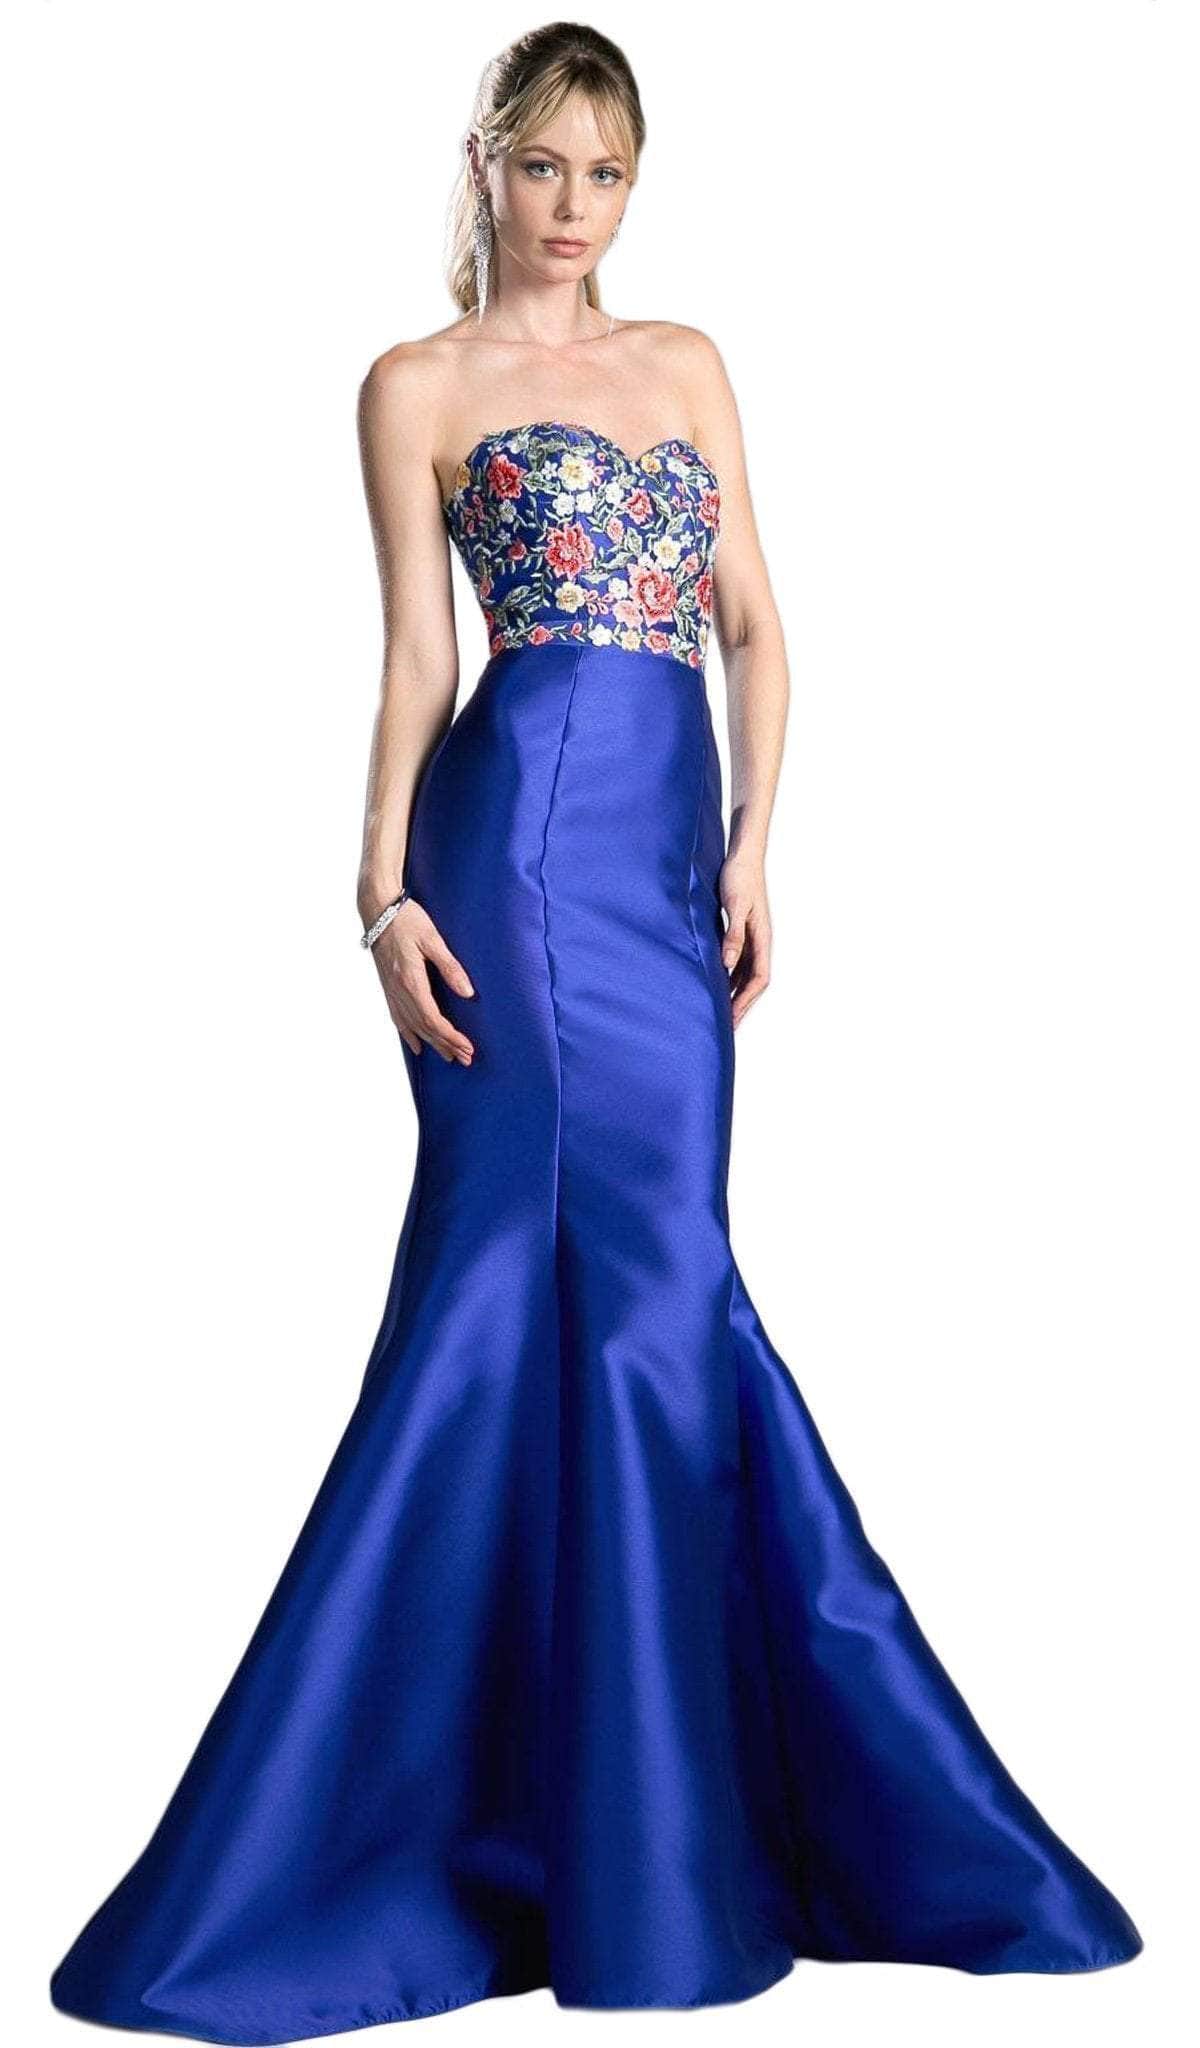 Image of Ladivine HW06 - Floral Applique Strapless Mermaid Evening Gown